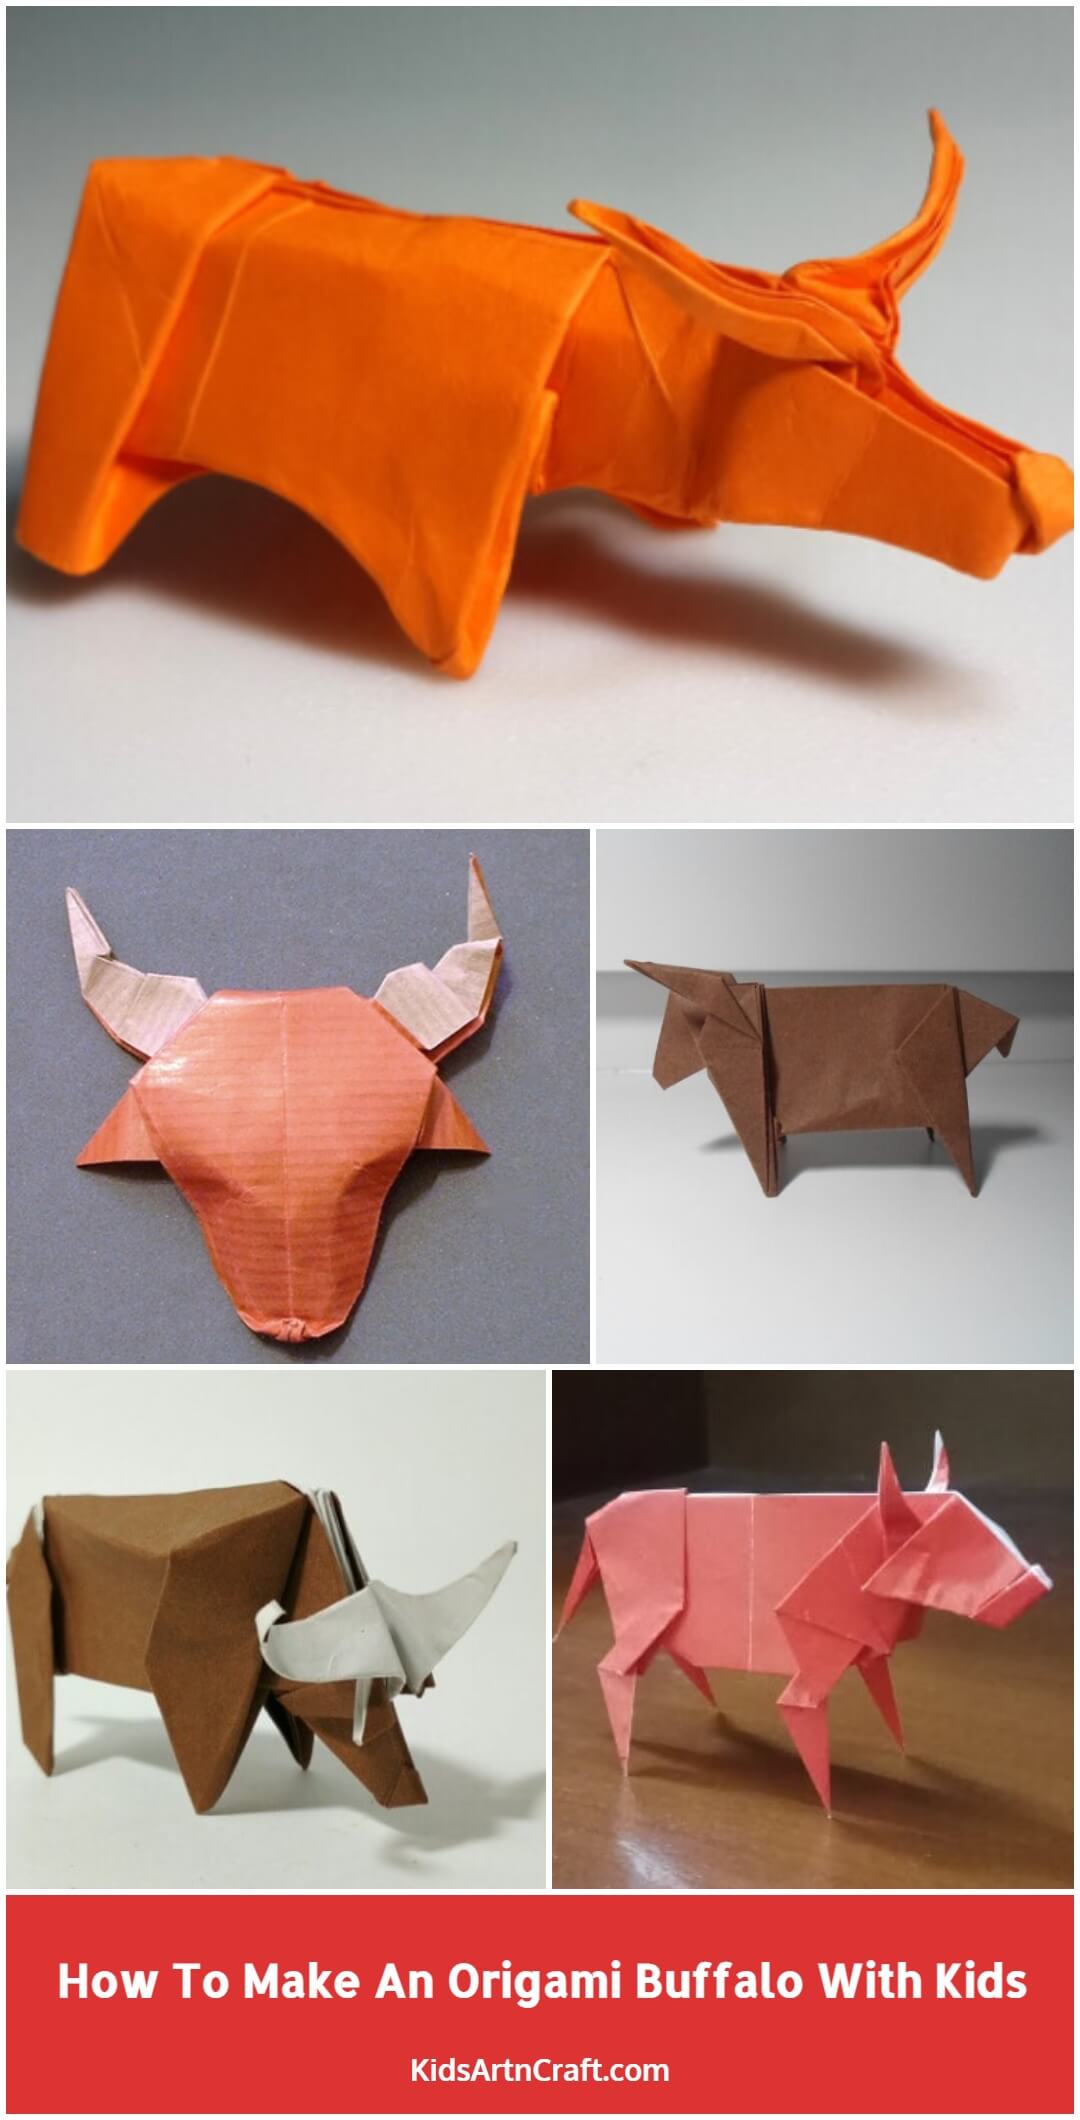 How To Make An Origami Buffalo With Kids